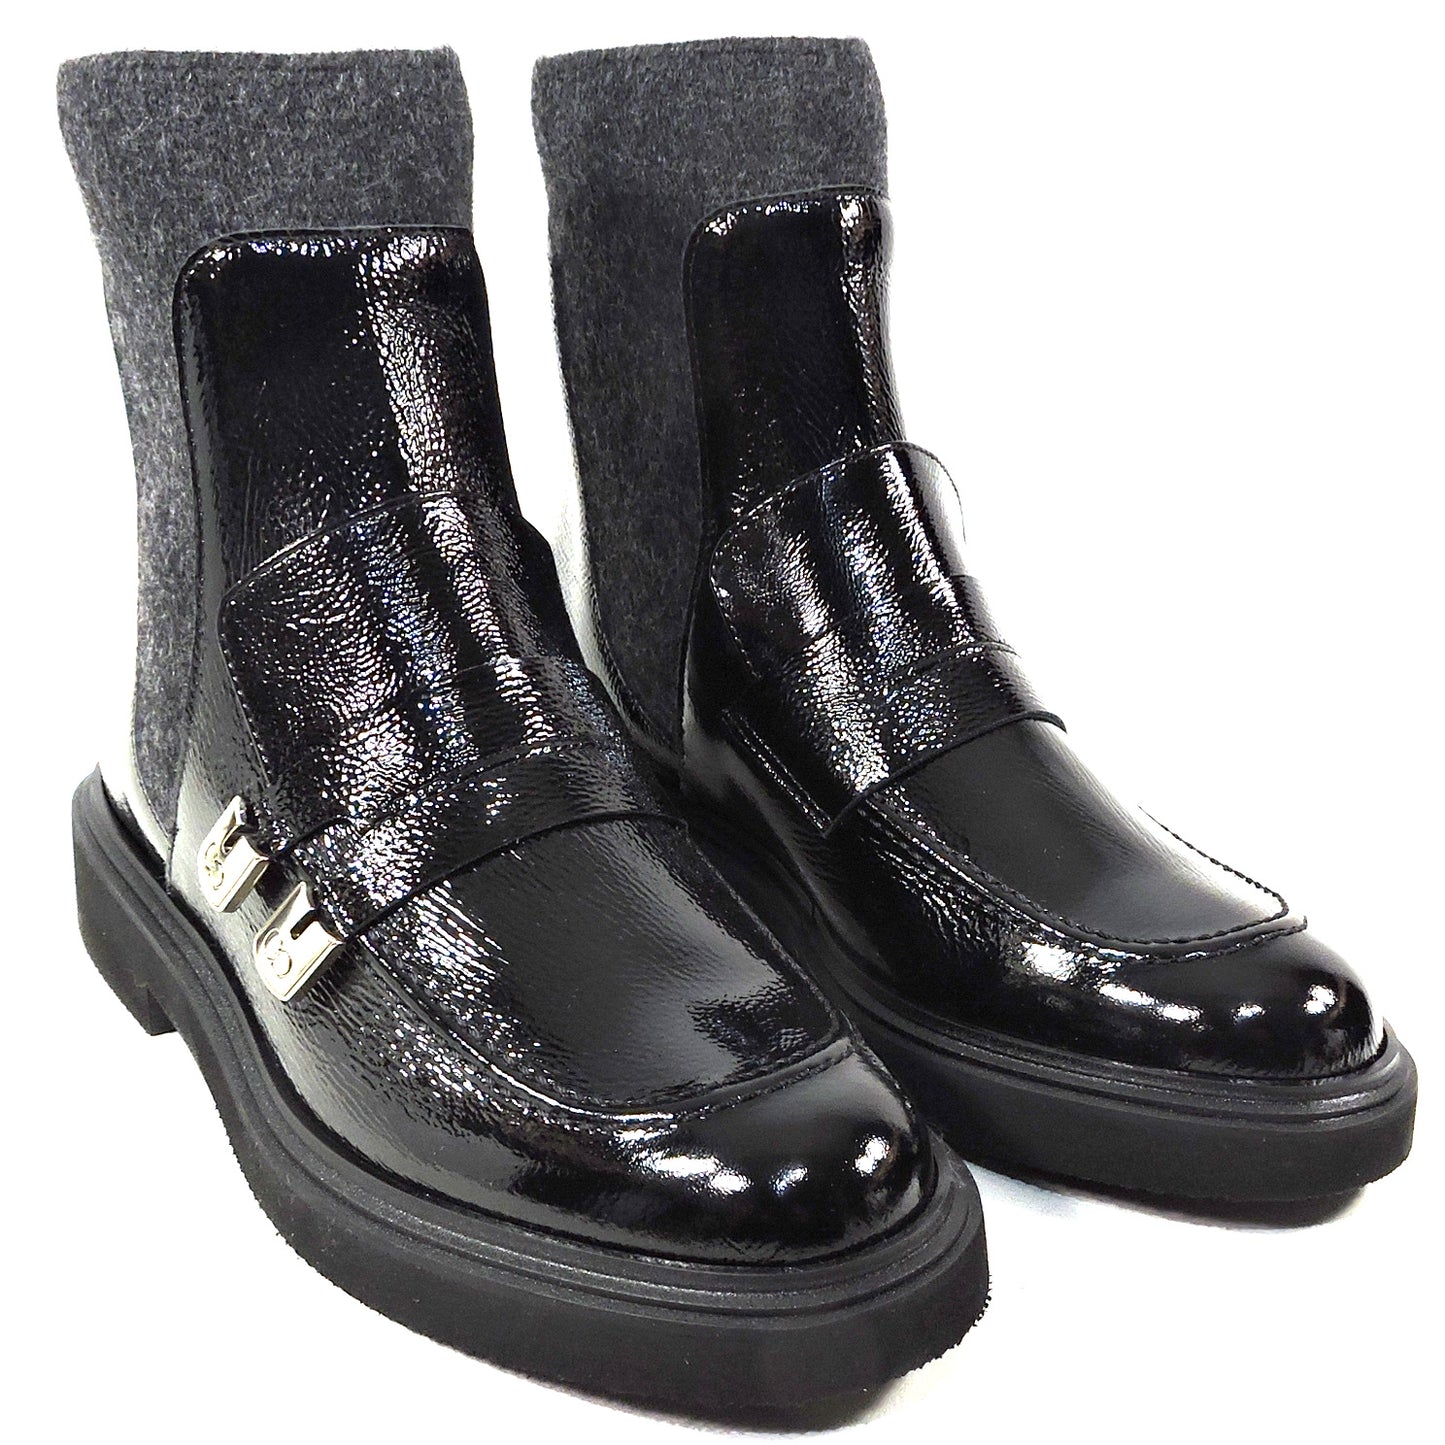 CASADEI 🇮🇹 WOMEN'S BLACK SOFT PATENT LEATHER WINTER COMFORT ANKLE BOOTIE